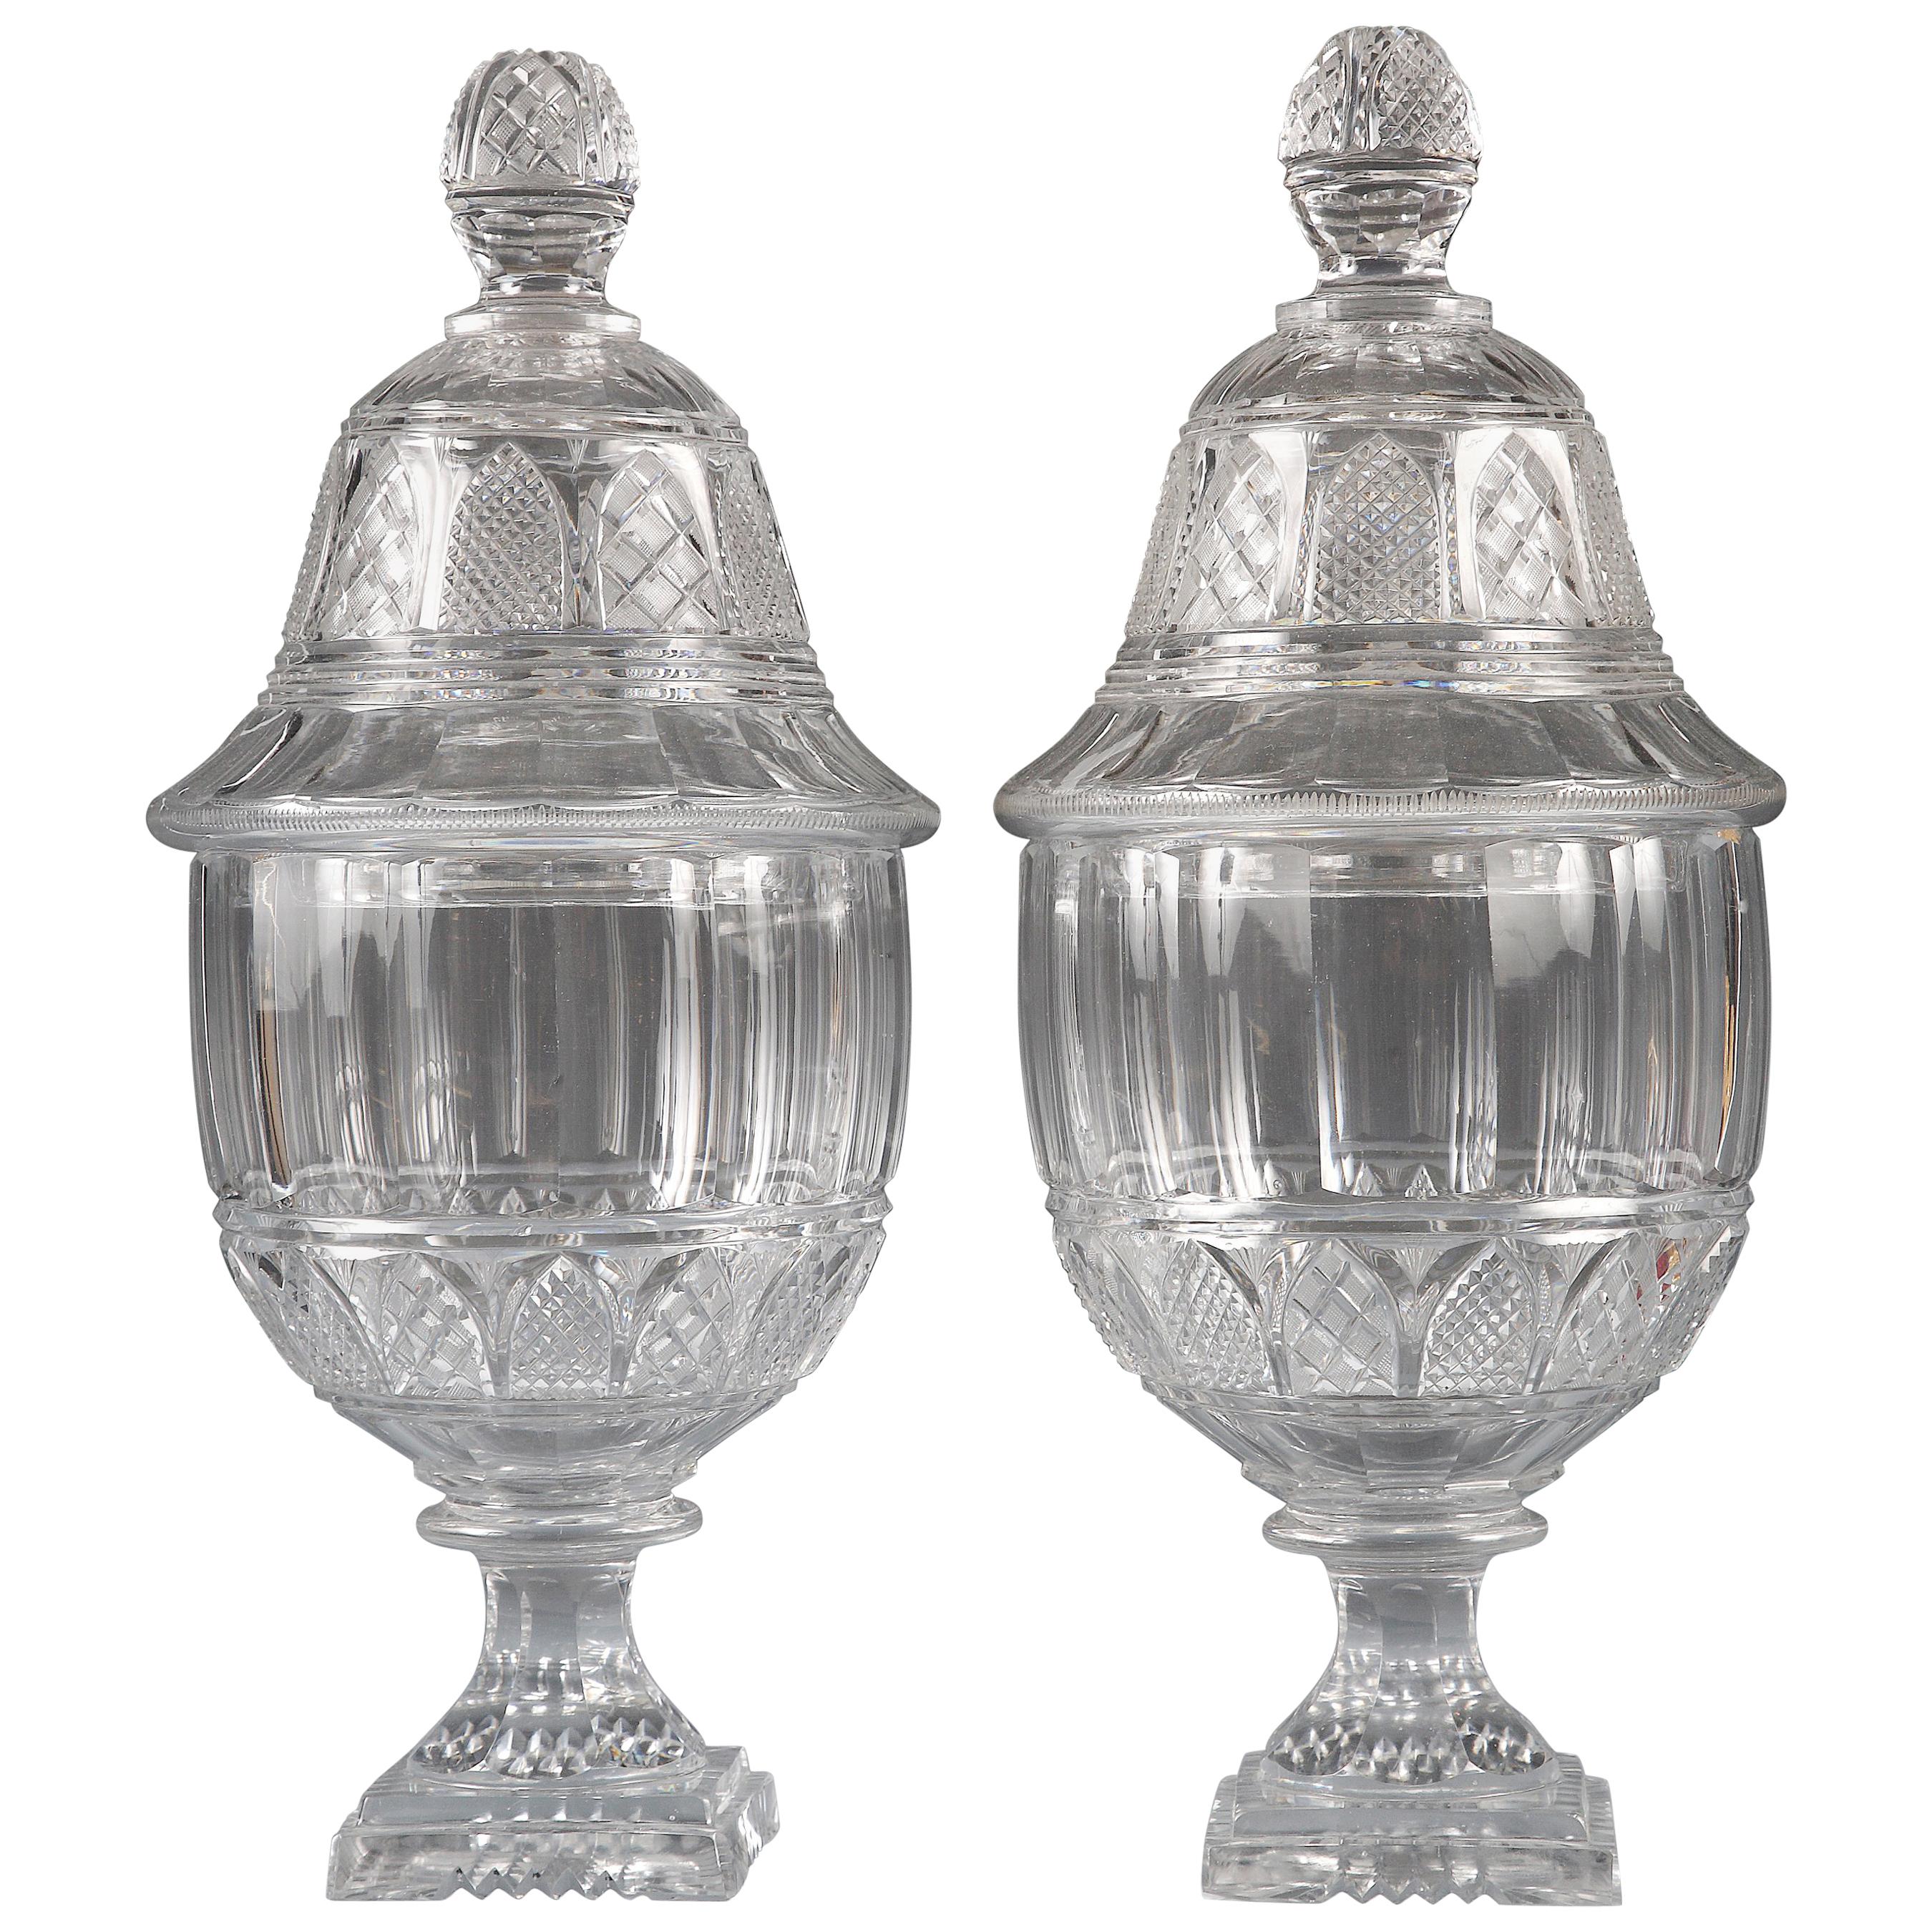 Lovely Pair of Crystal Covered Vases Attributed to Baccarat, France, Circa 1900